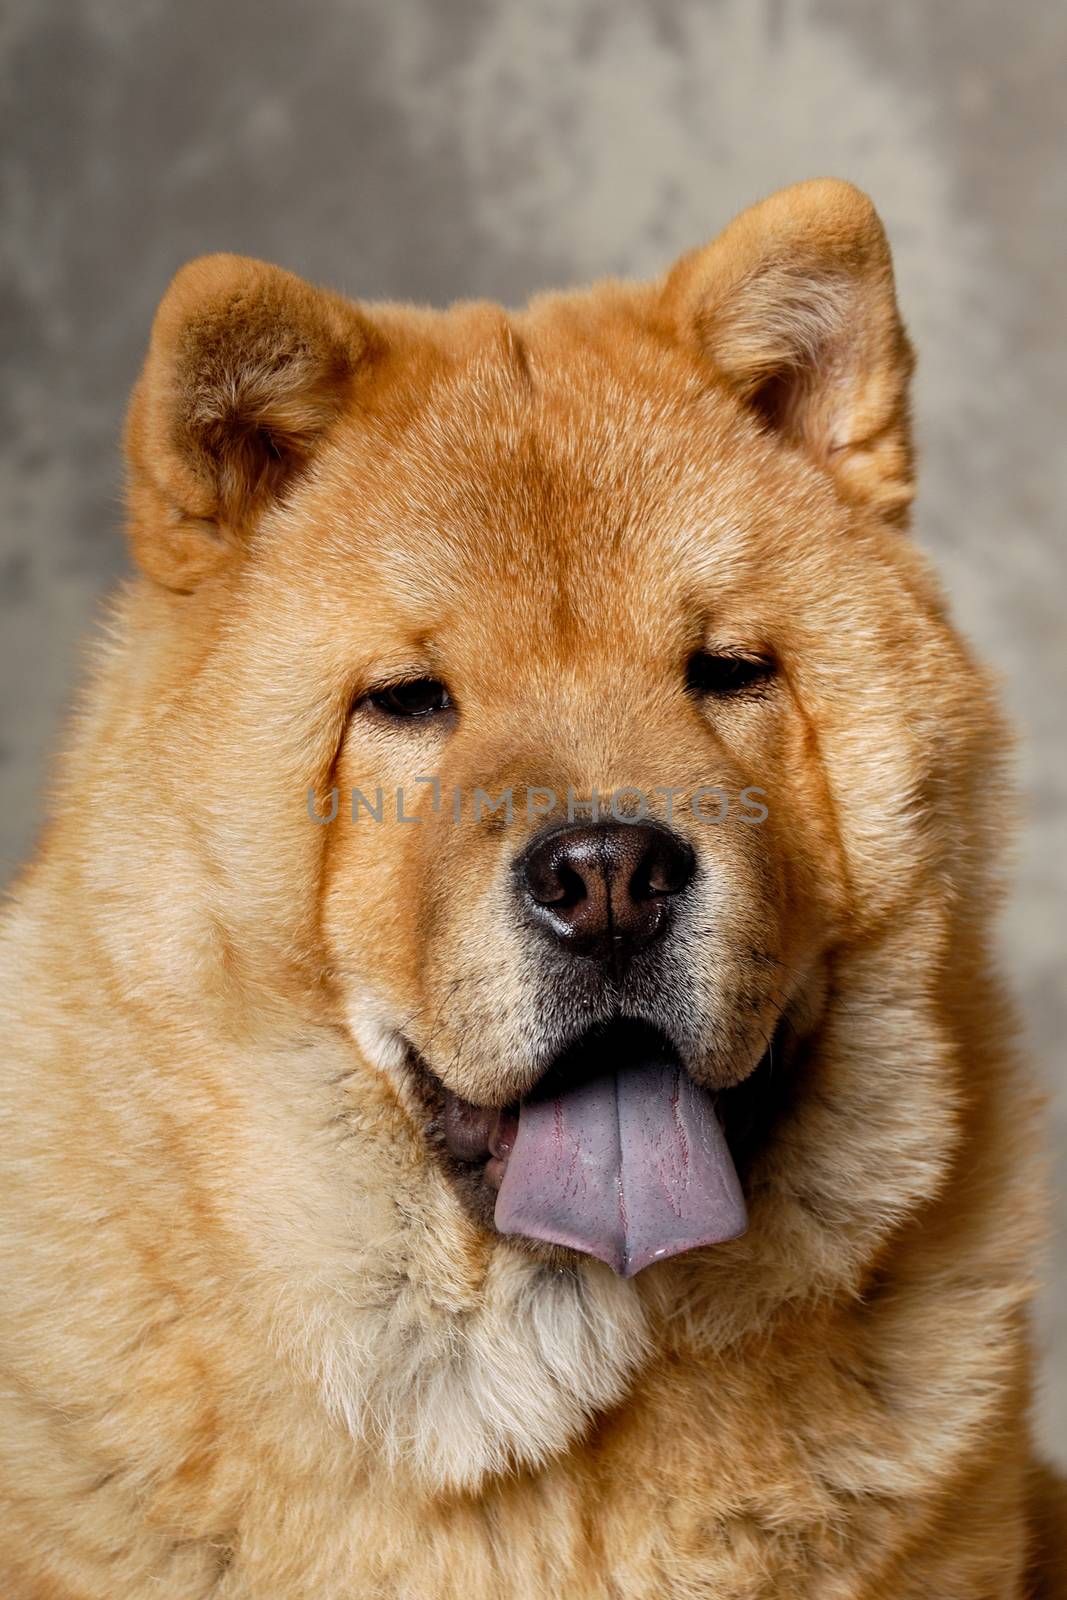 Face of Chow dog by cfoto